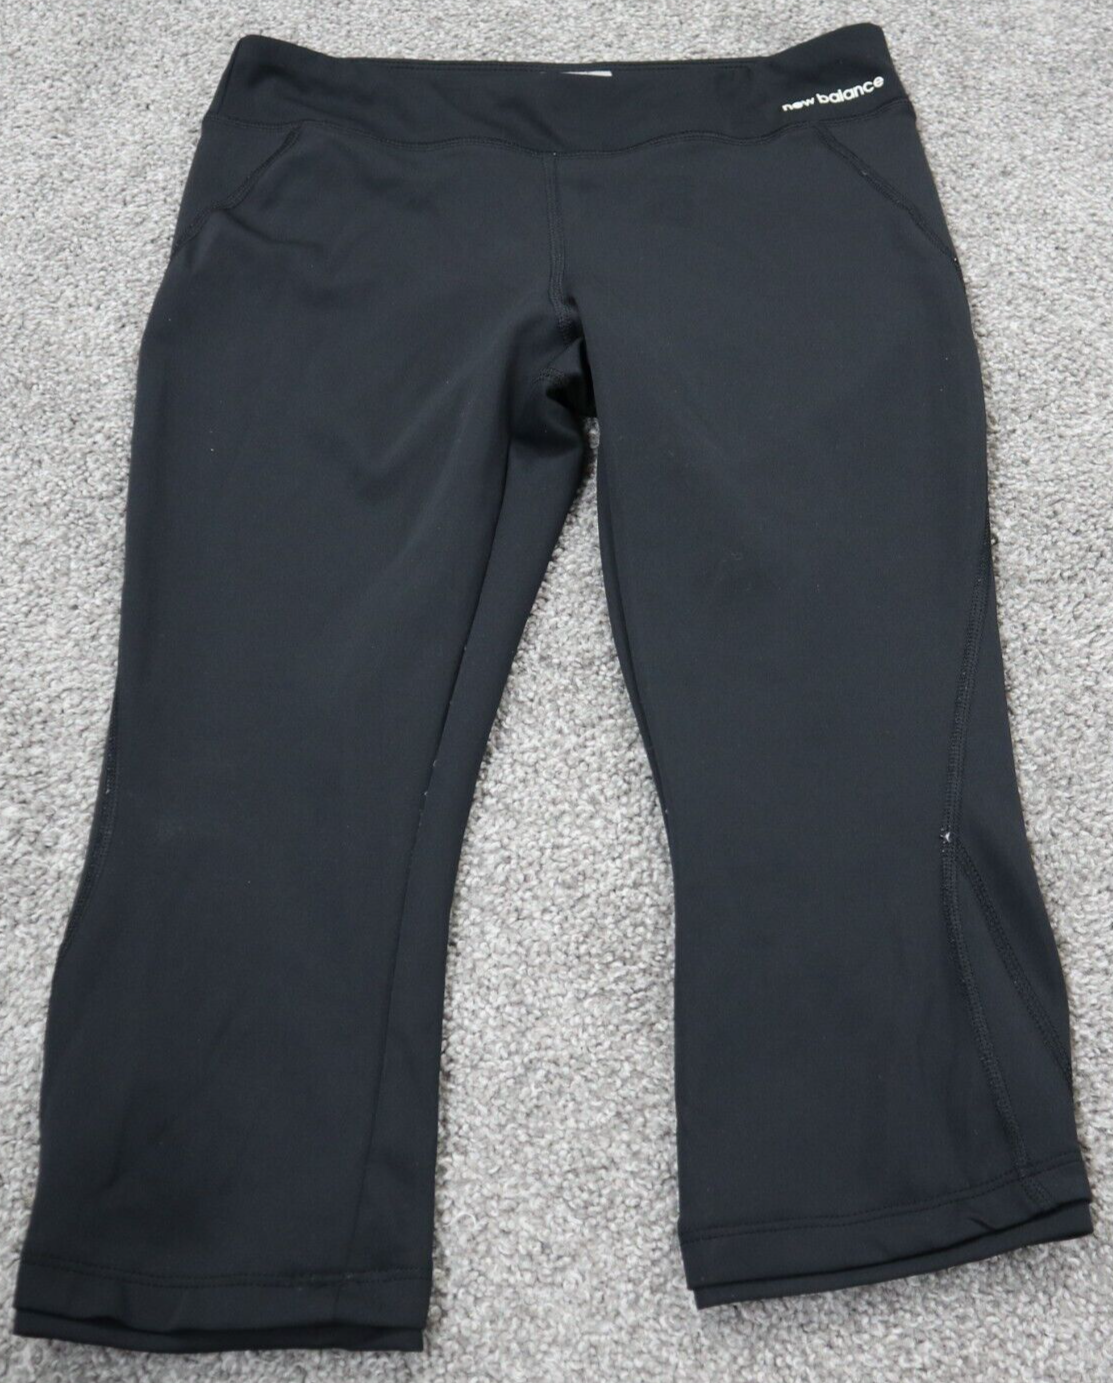 New Balance Womens Activewear Athletic Logo Cropped Pants Mid Rise Black Size M